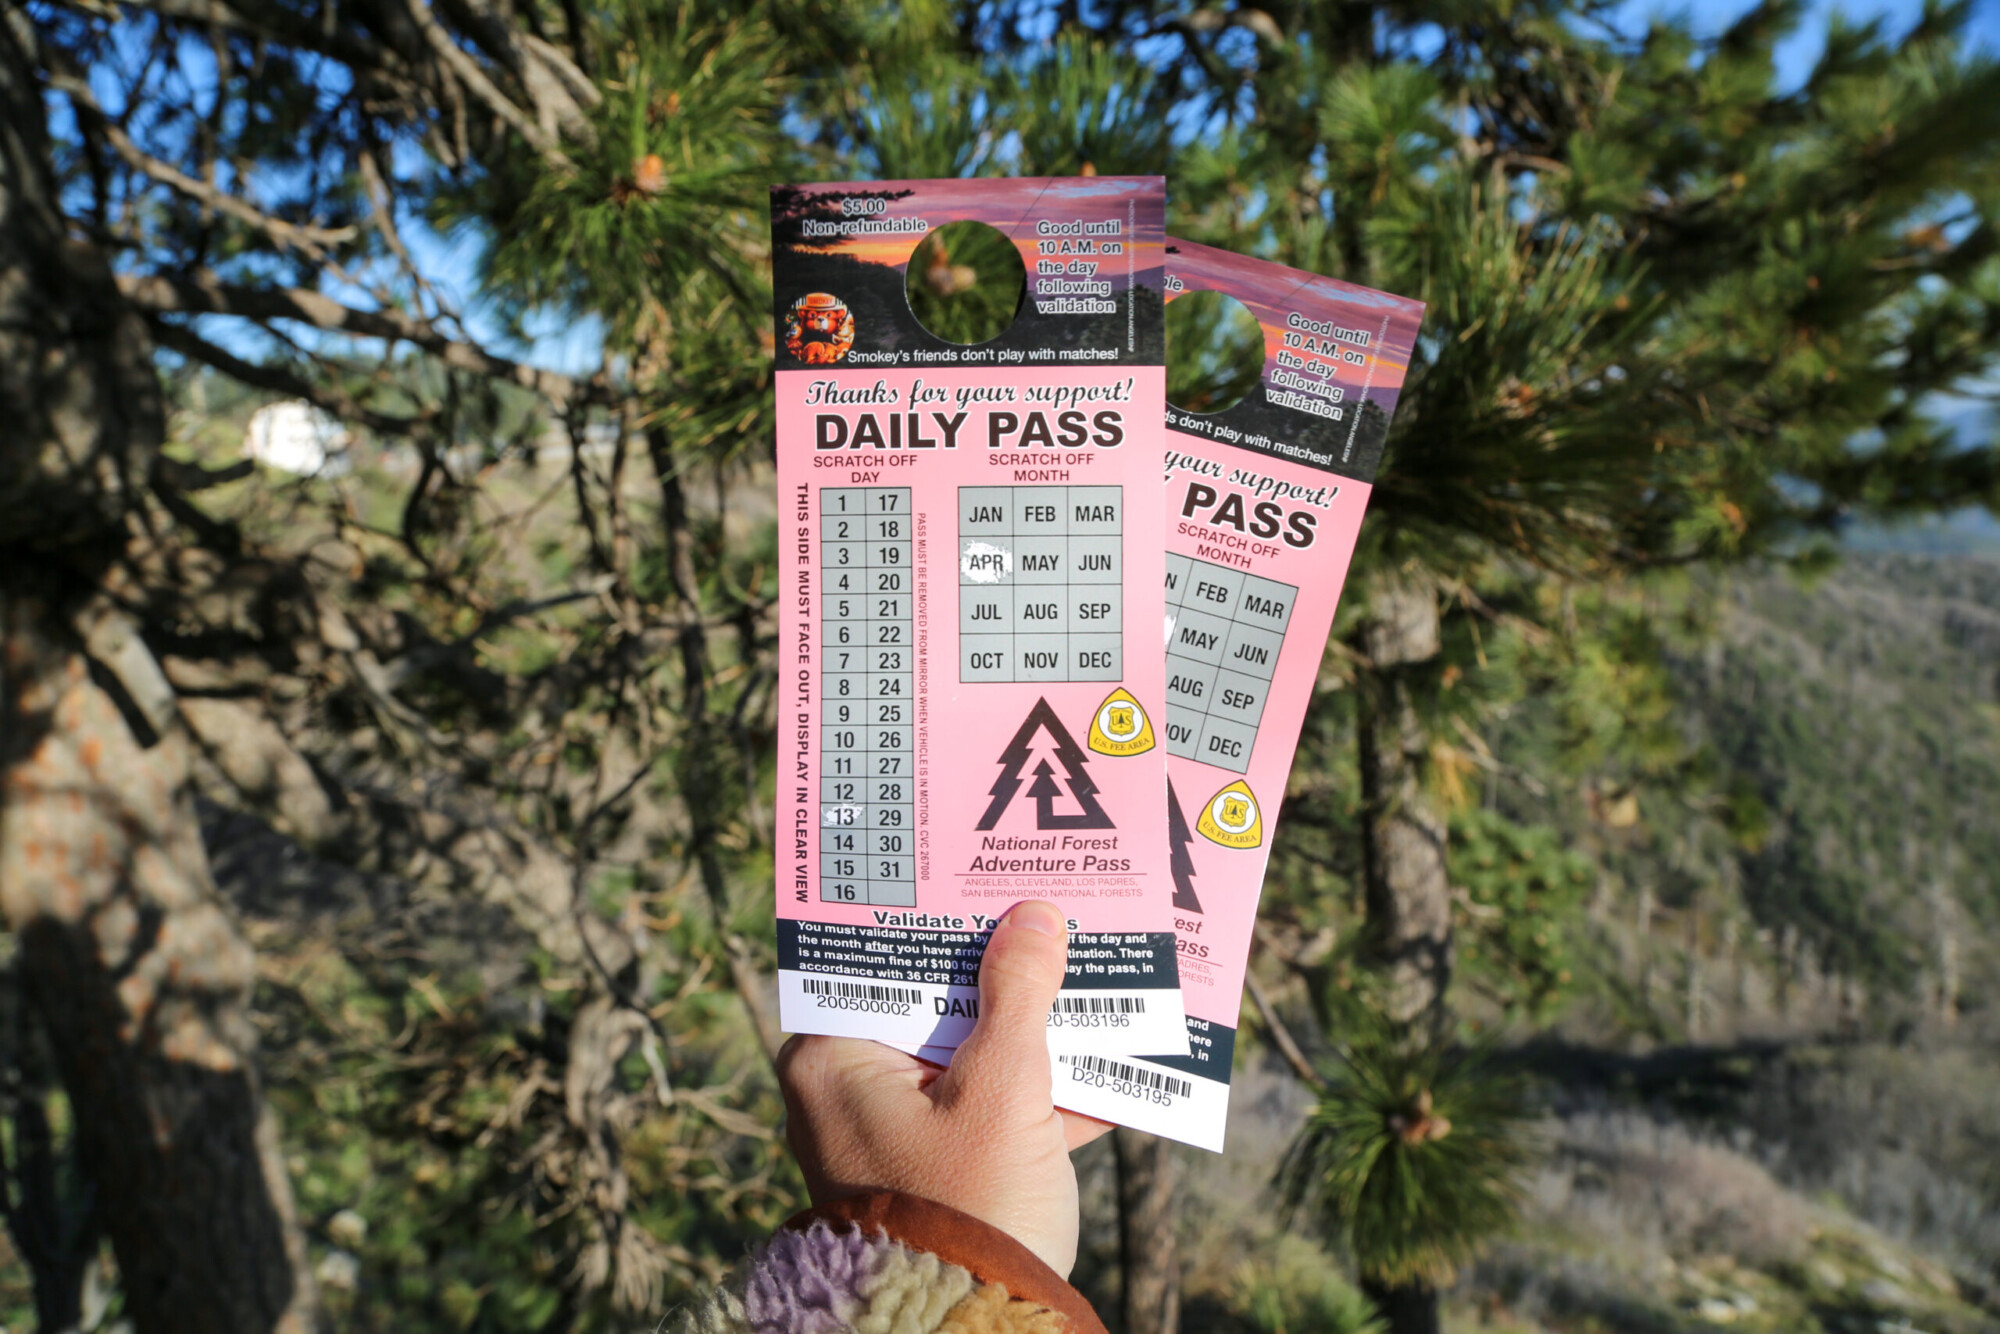 Two daily passes held up in front of conifer trees. Passes are valid for hikes and attractions in and around Lake Arrowhead, California.